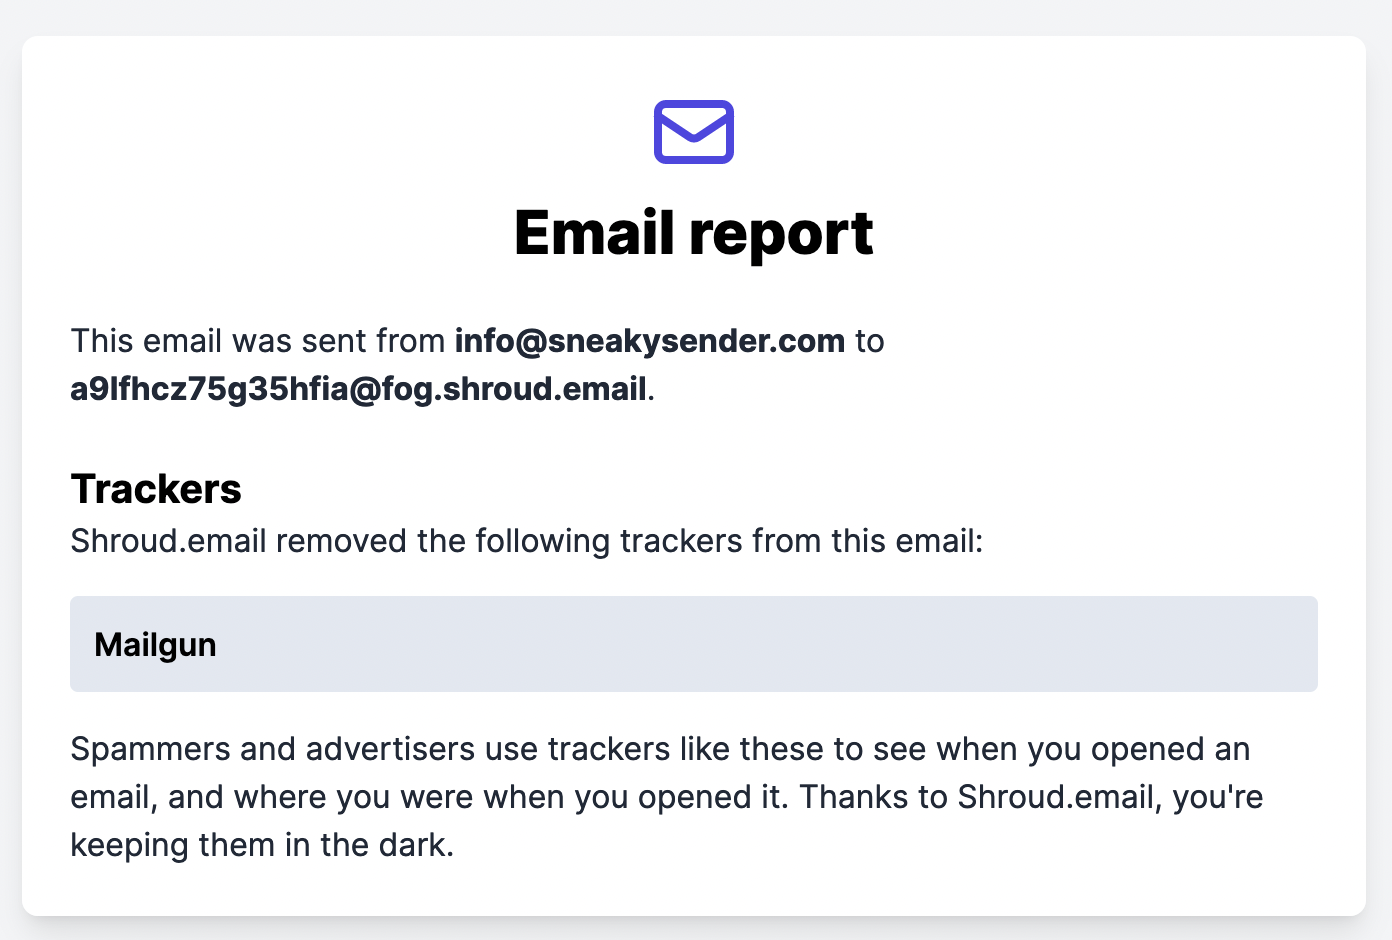 The Shroud.email privacy report showing one blocked tracker in an email